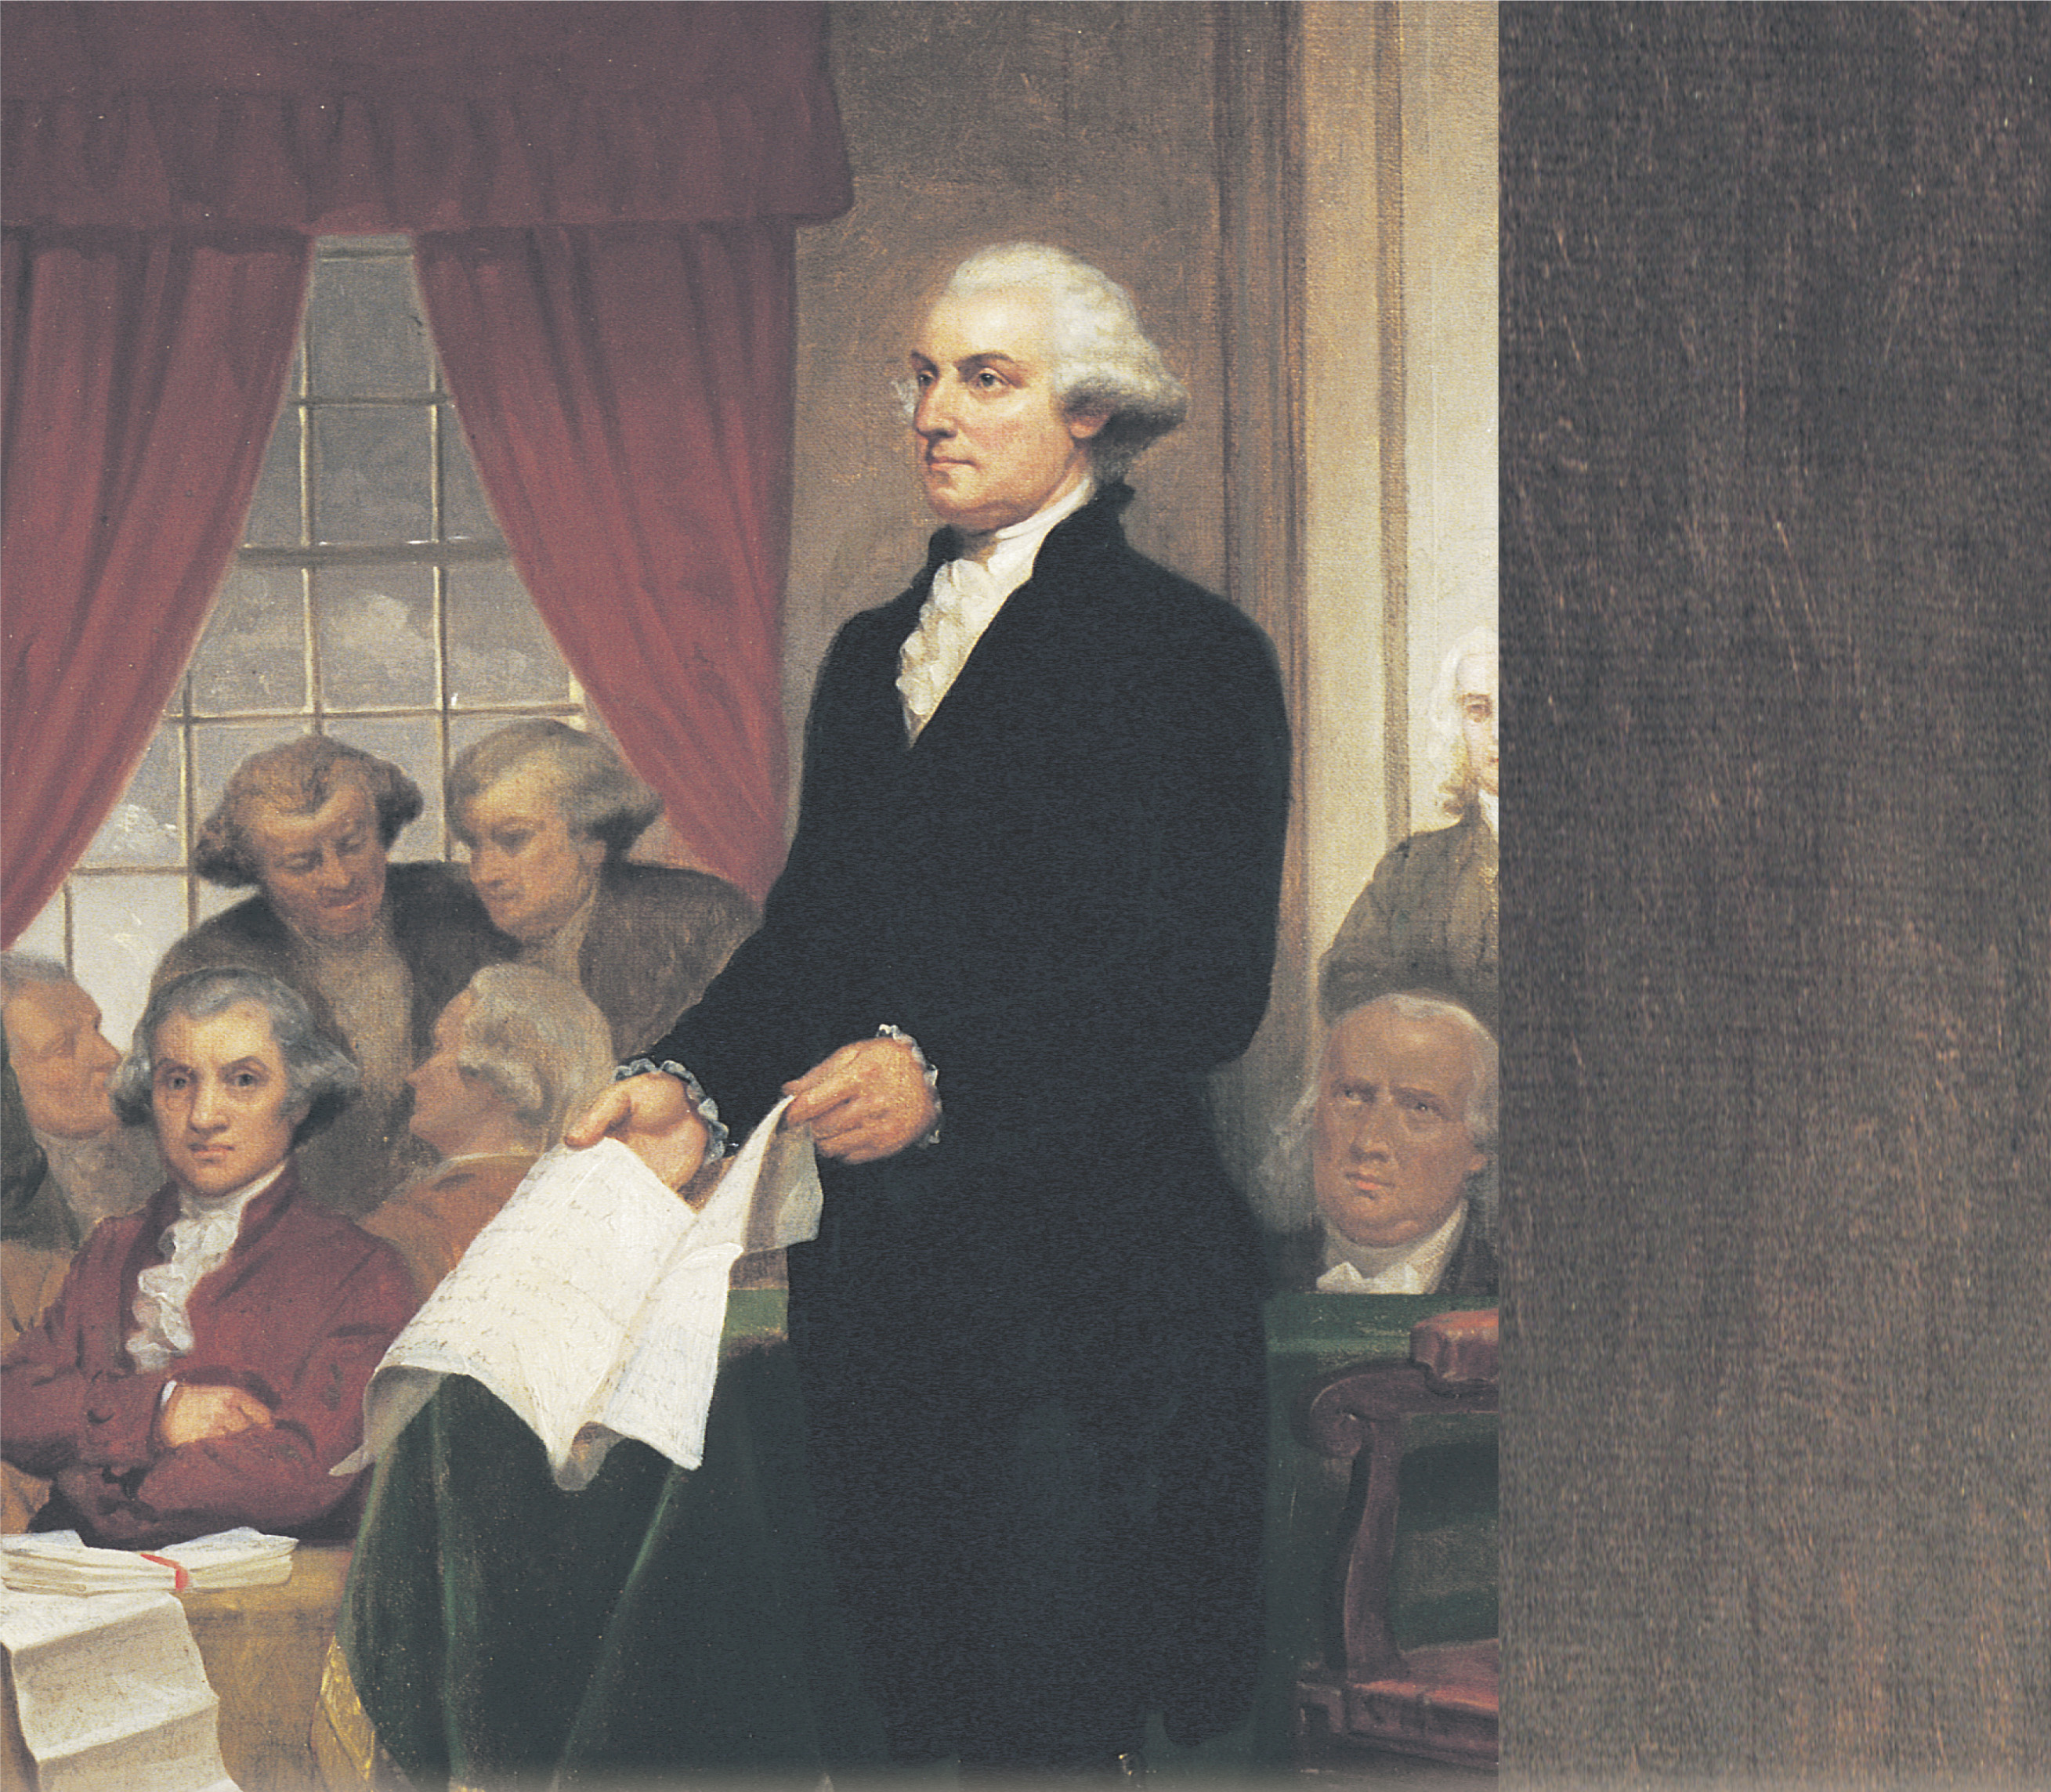 A painting: Washington addresses the Constitutional Congress, wearing a white wig.